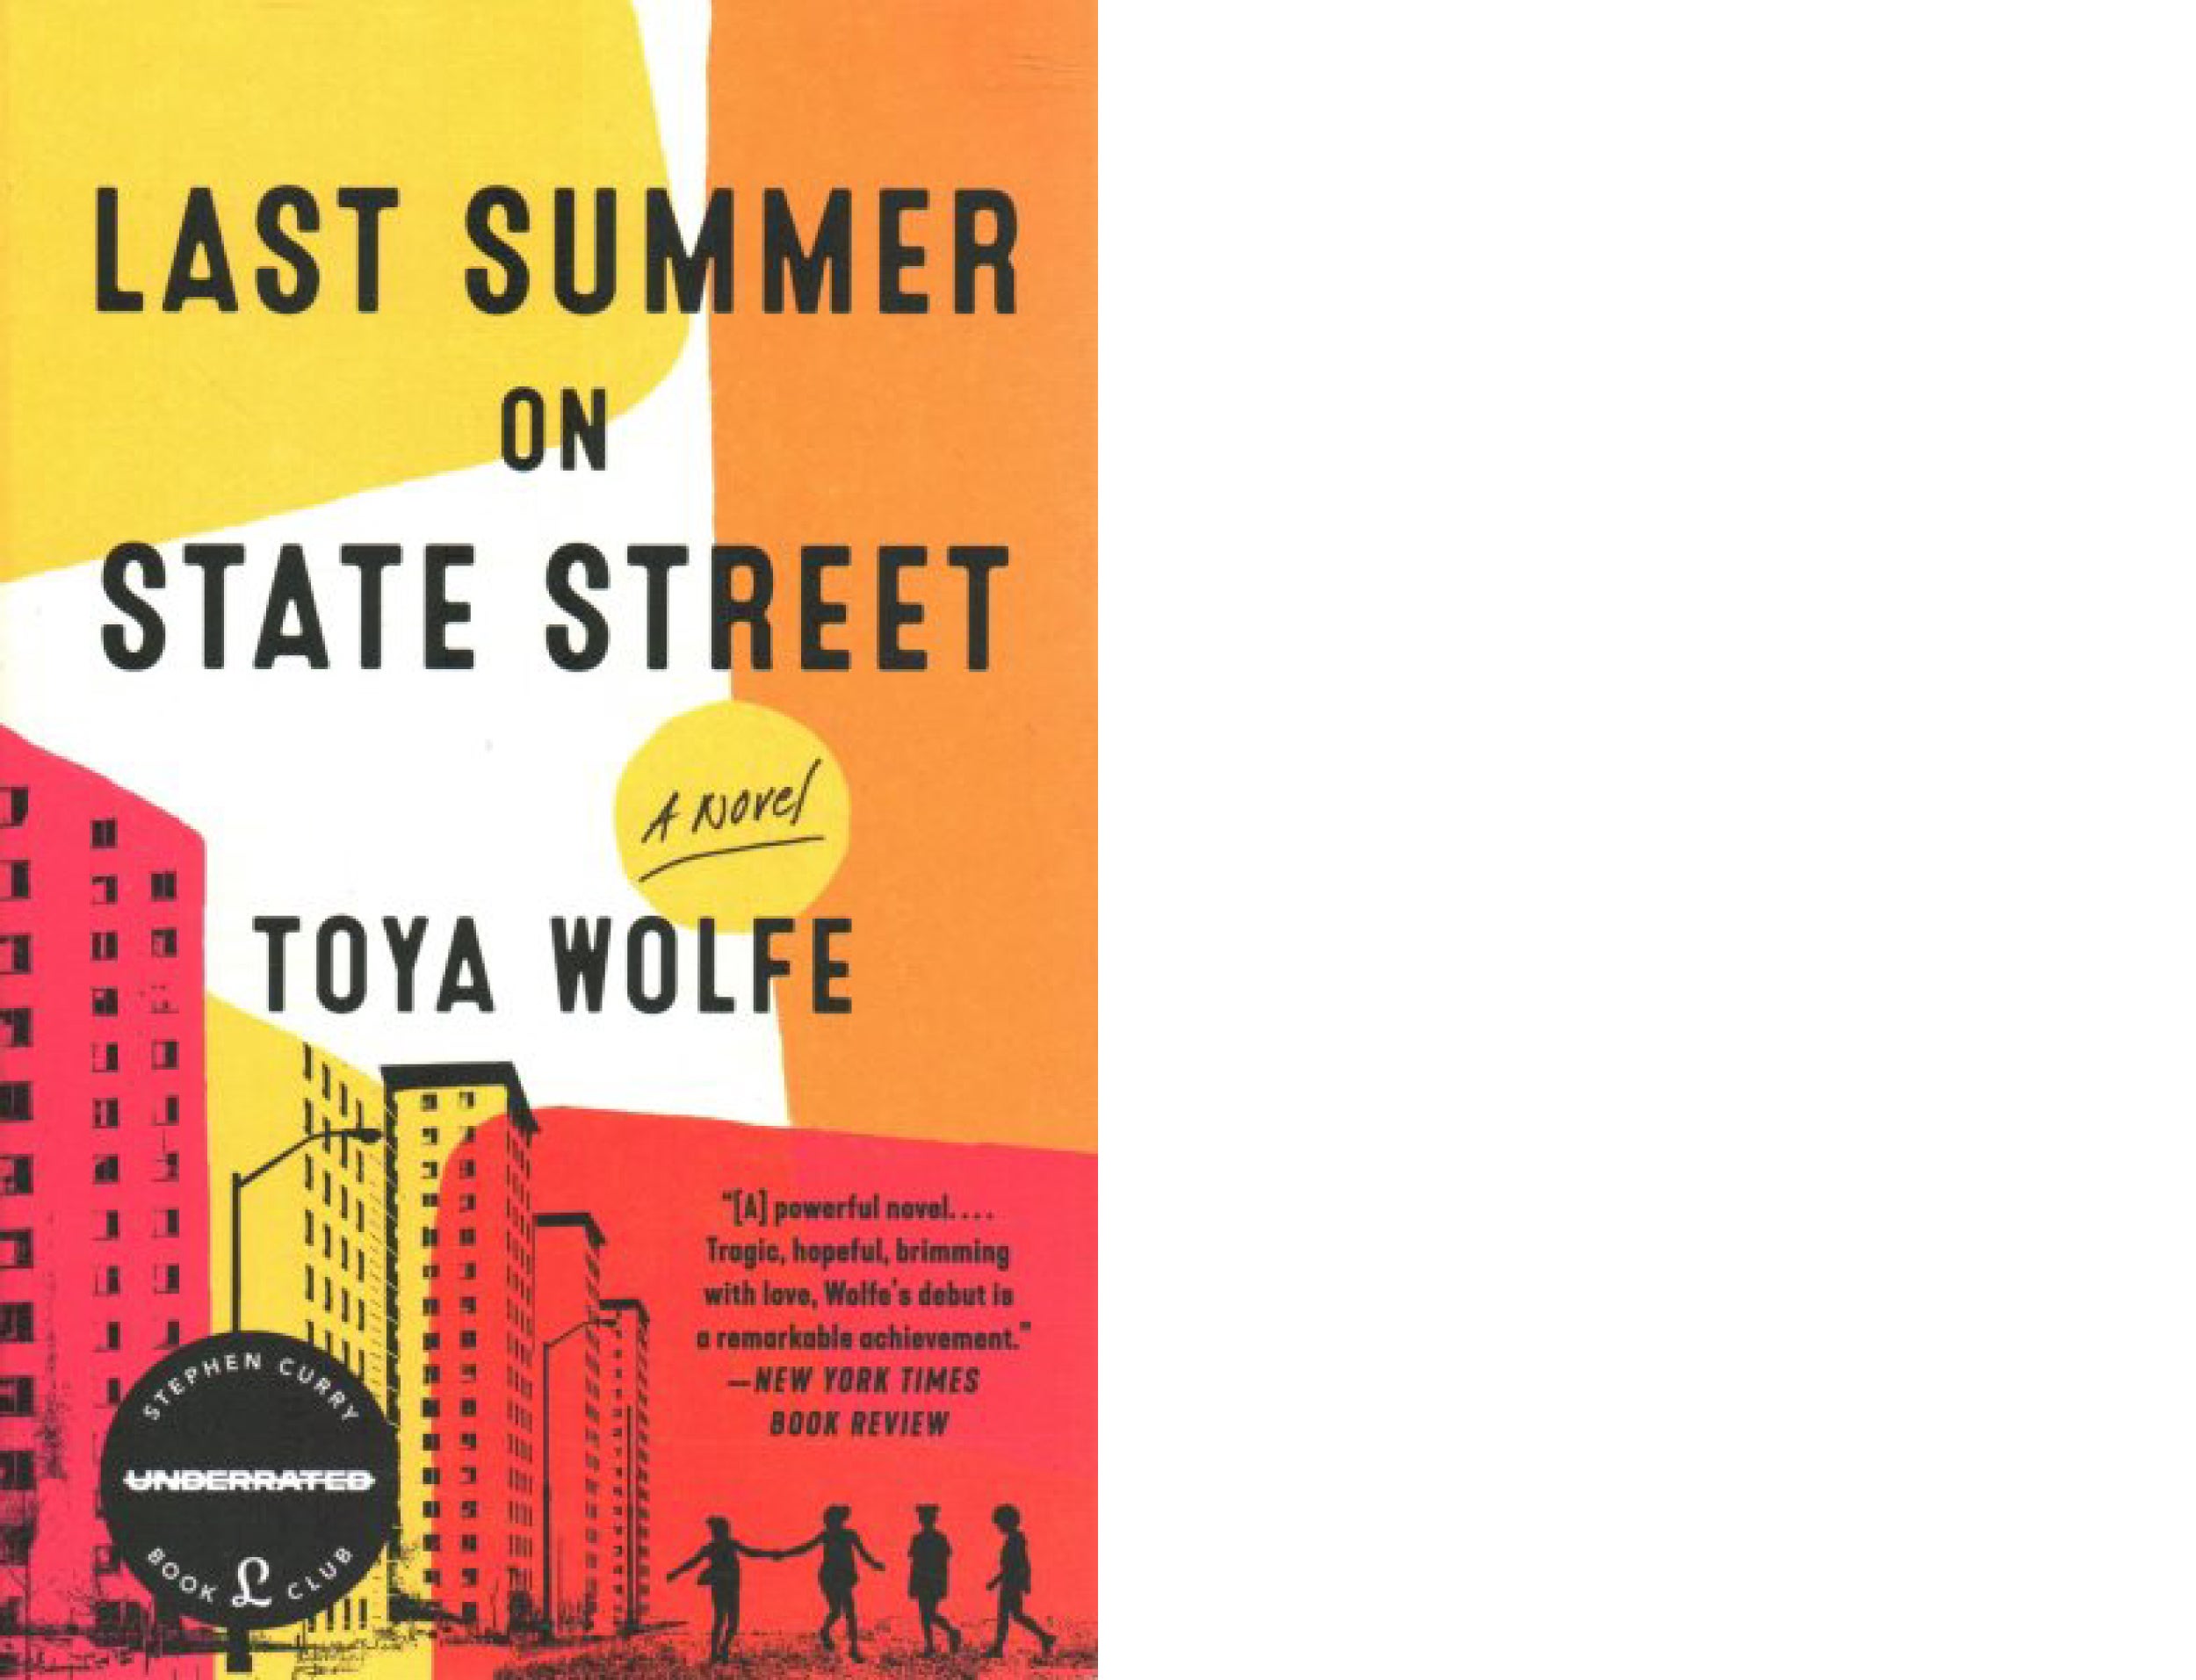 Book cover: "Last Summer on State Street."